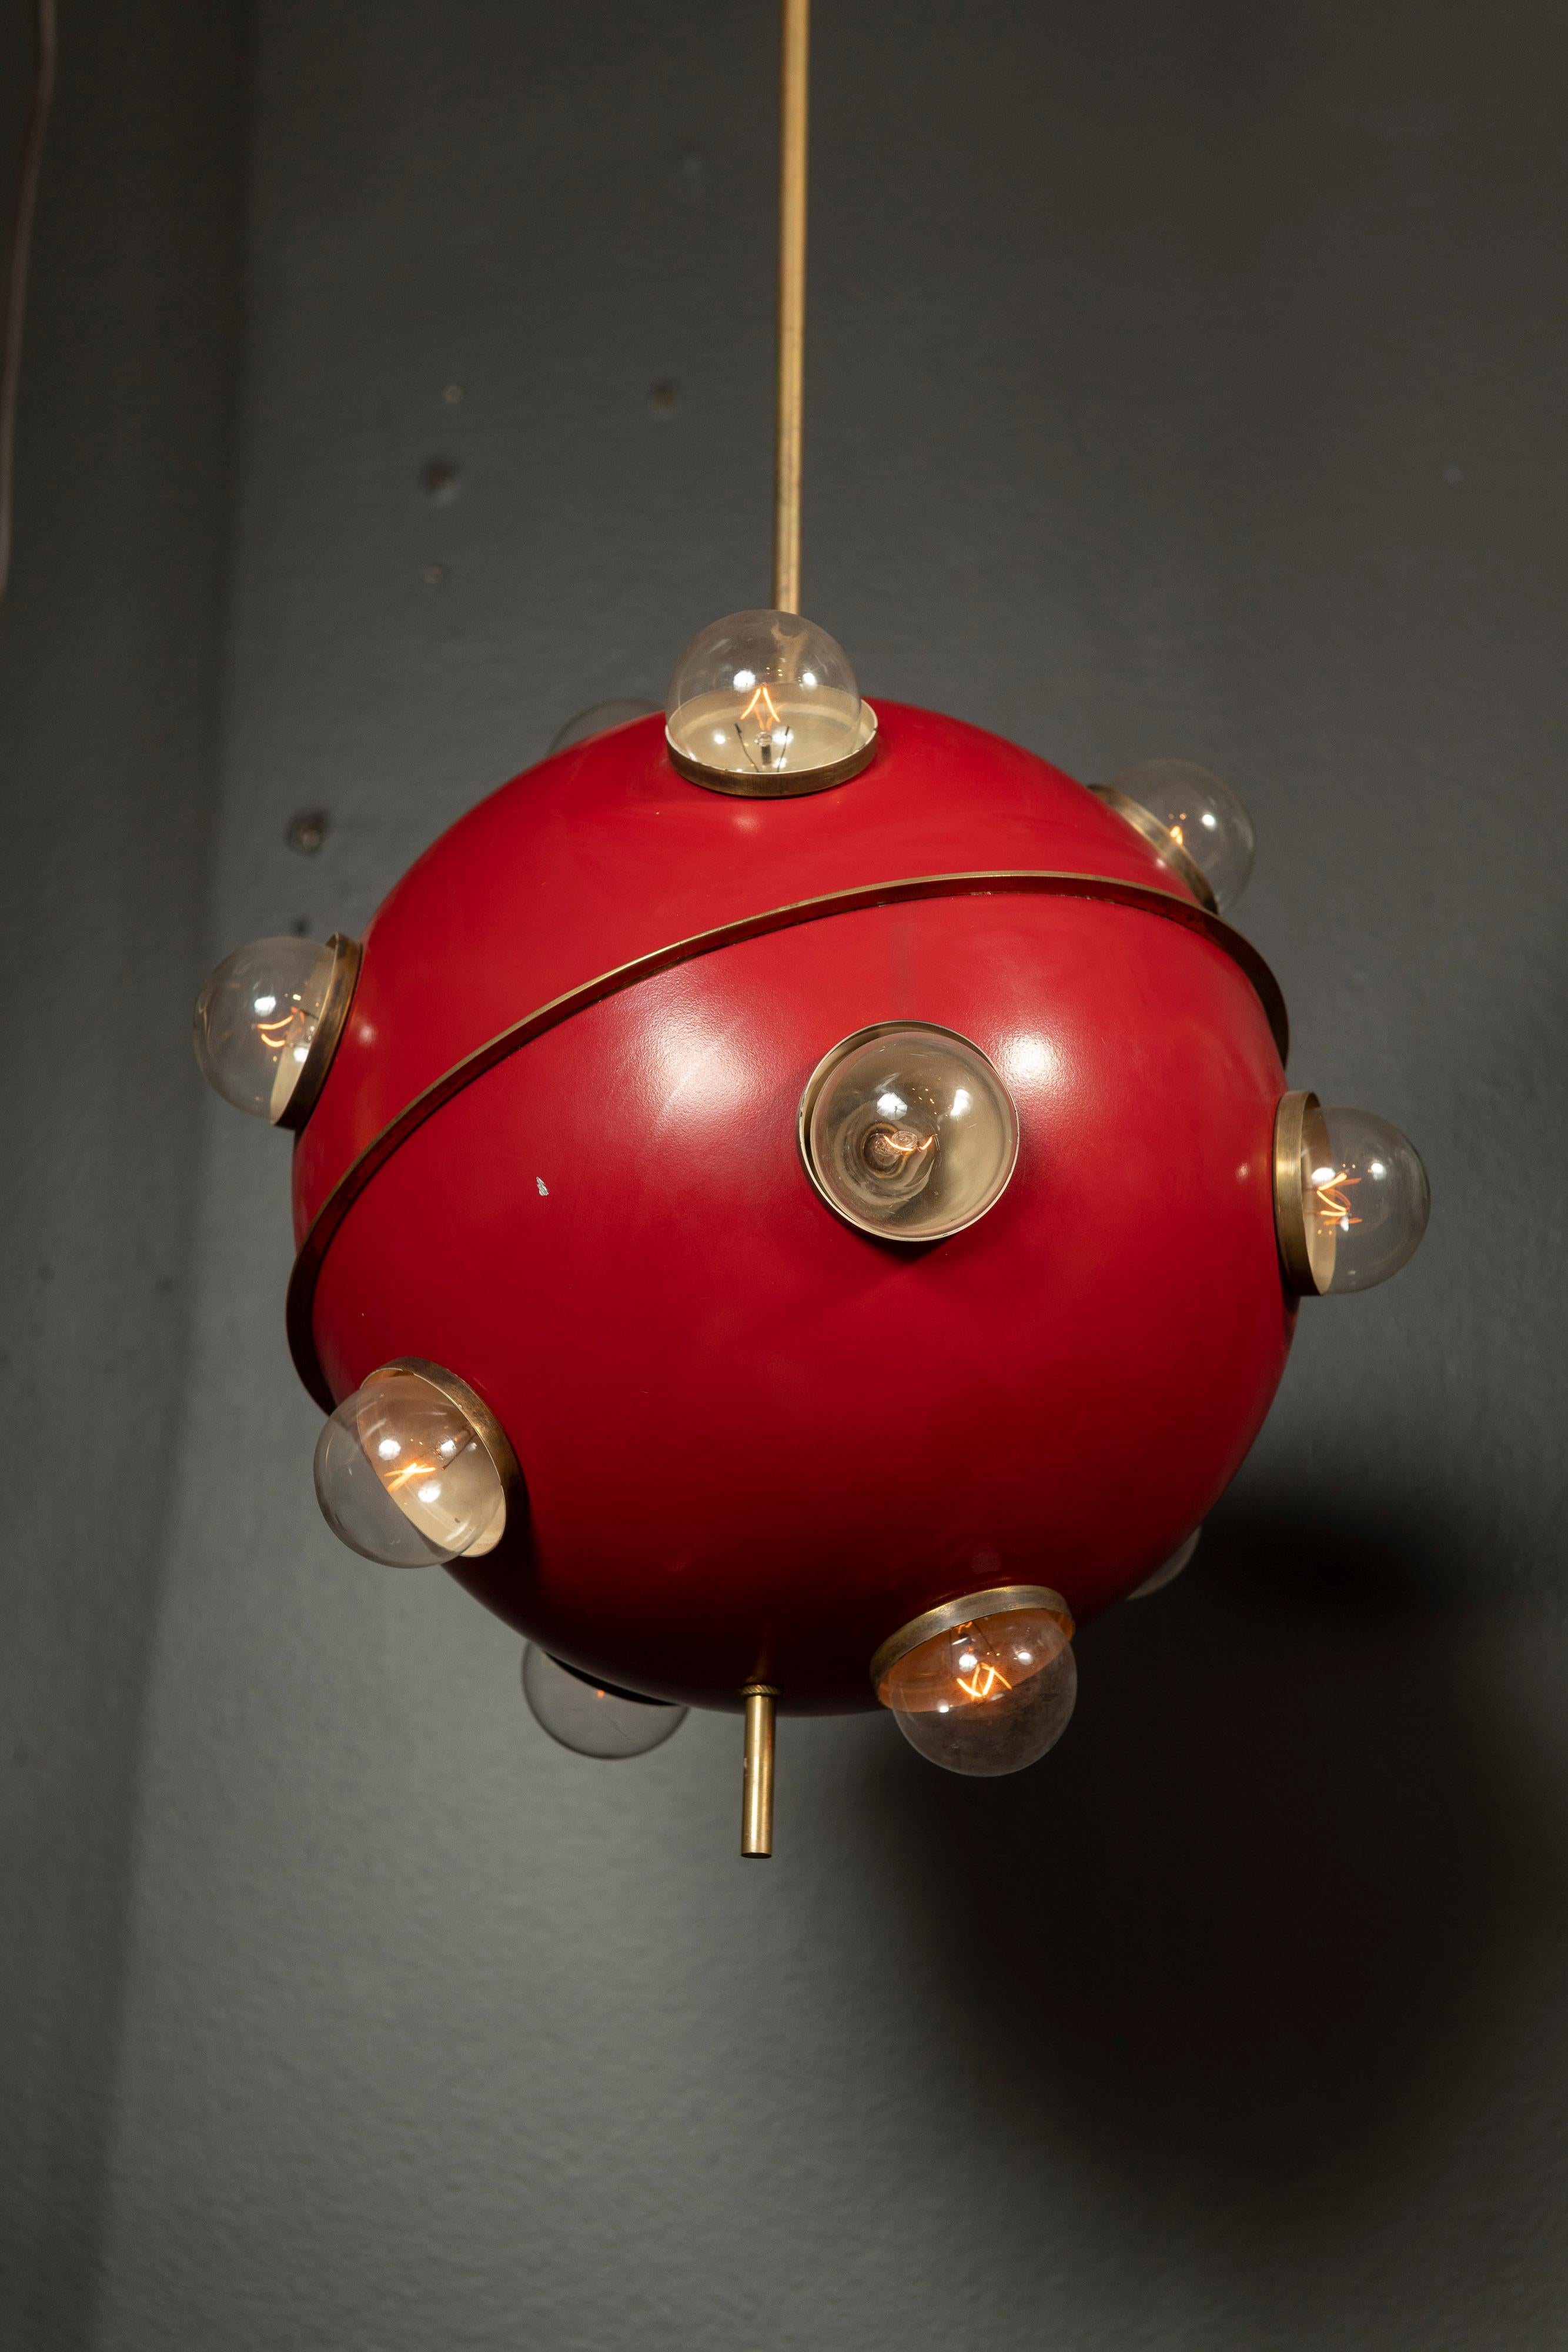 Our rare and desirable Oscar Torlasco, Suspension Pendant Model 553, is manufactured in Italy by Lumi. This light is sure to both enliven and light any space it inhabits. And the cherry red color - wow!